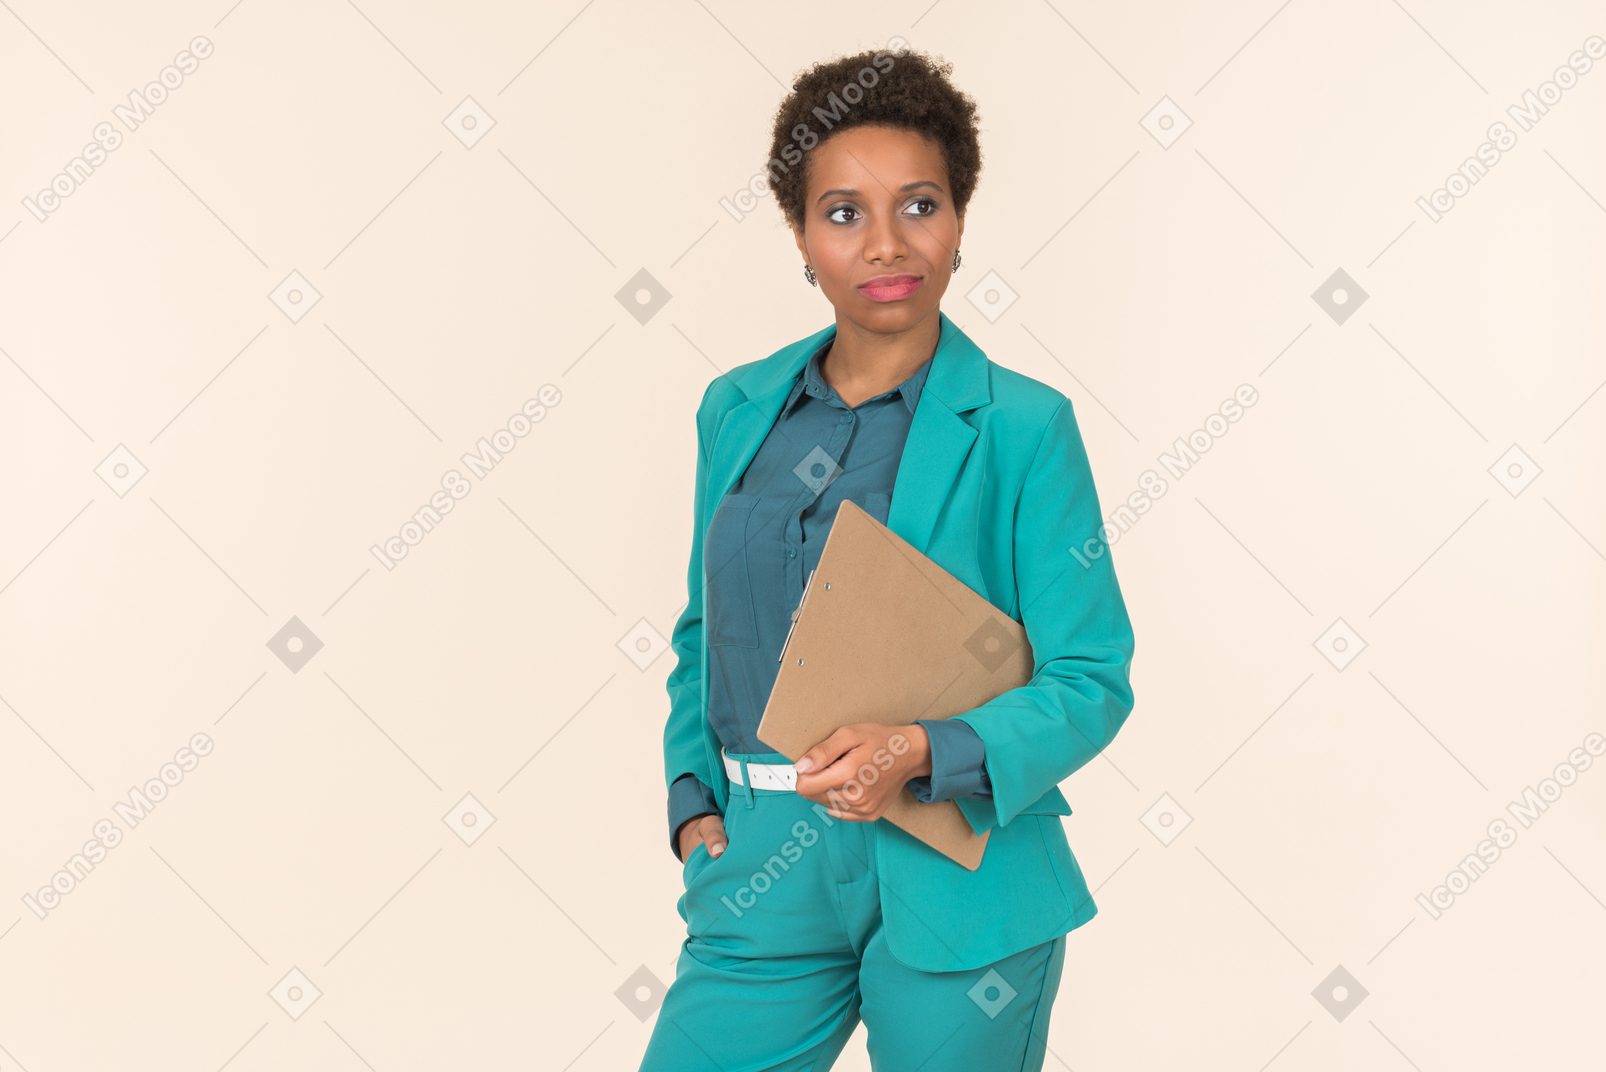 Smiling young office worker holding folder